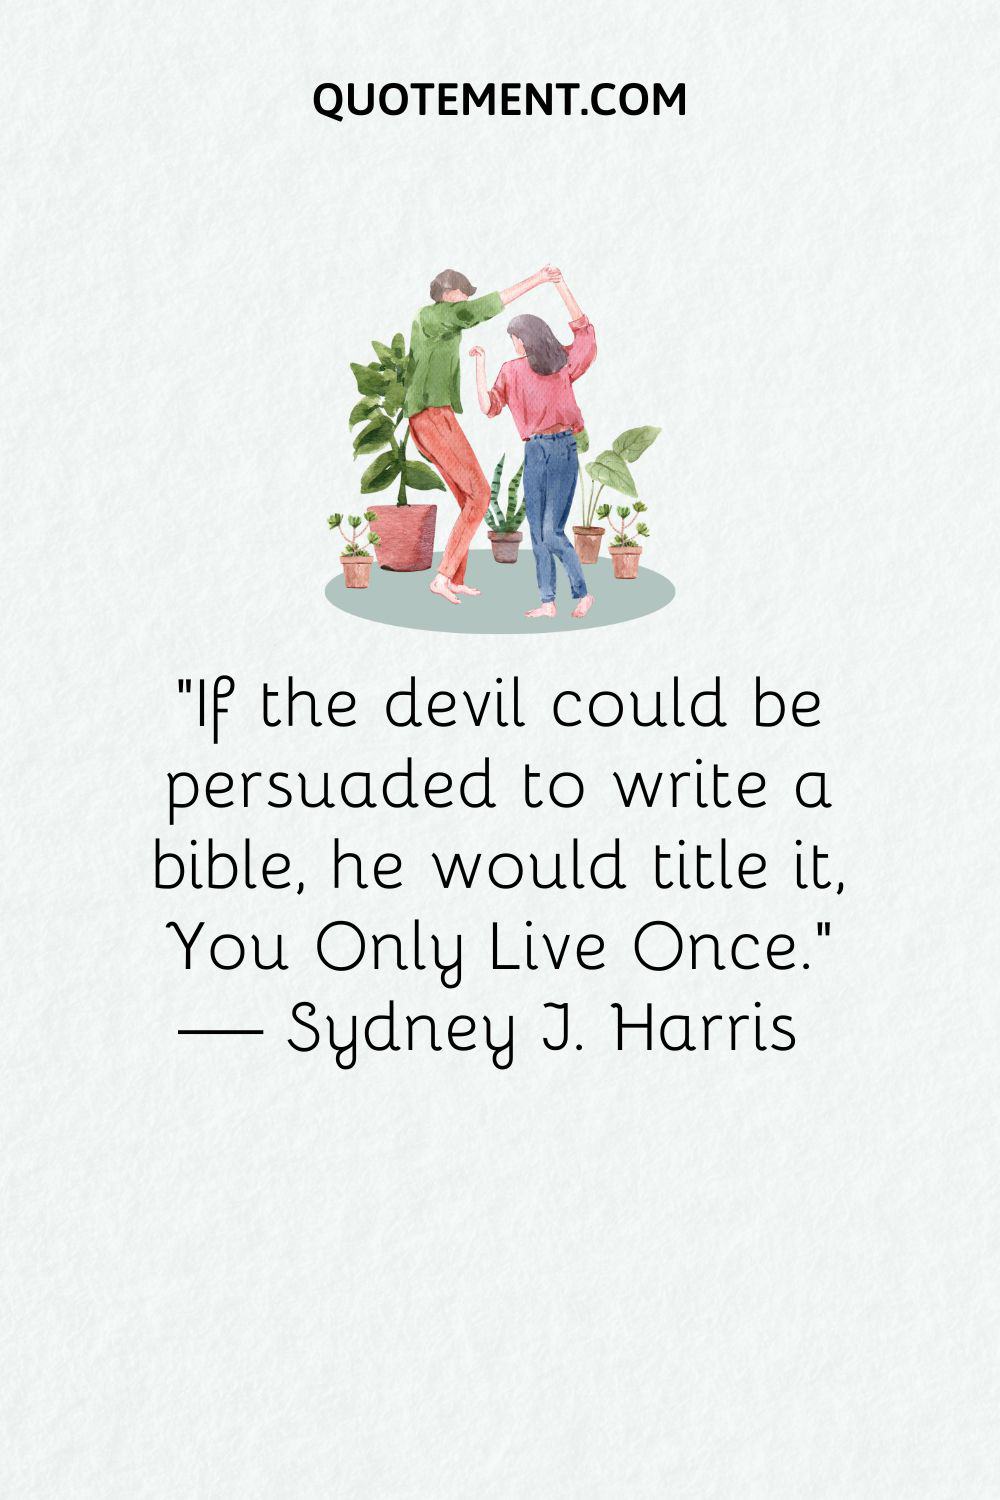 “If the devil could be persuaded to write a bible, he would title it, You Only Live Once.” — Sydney J. Harris